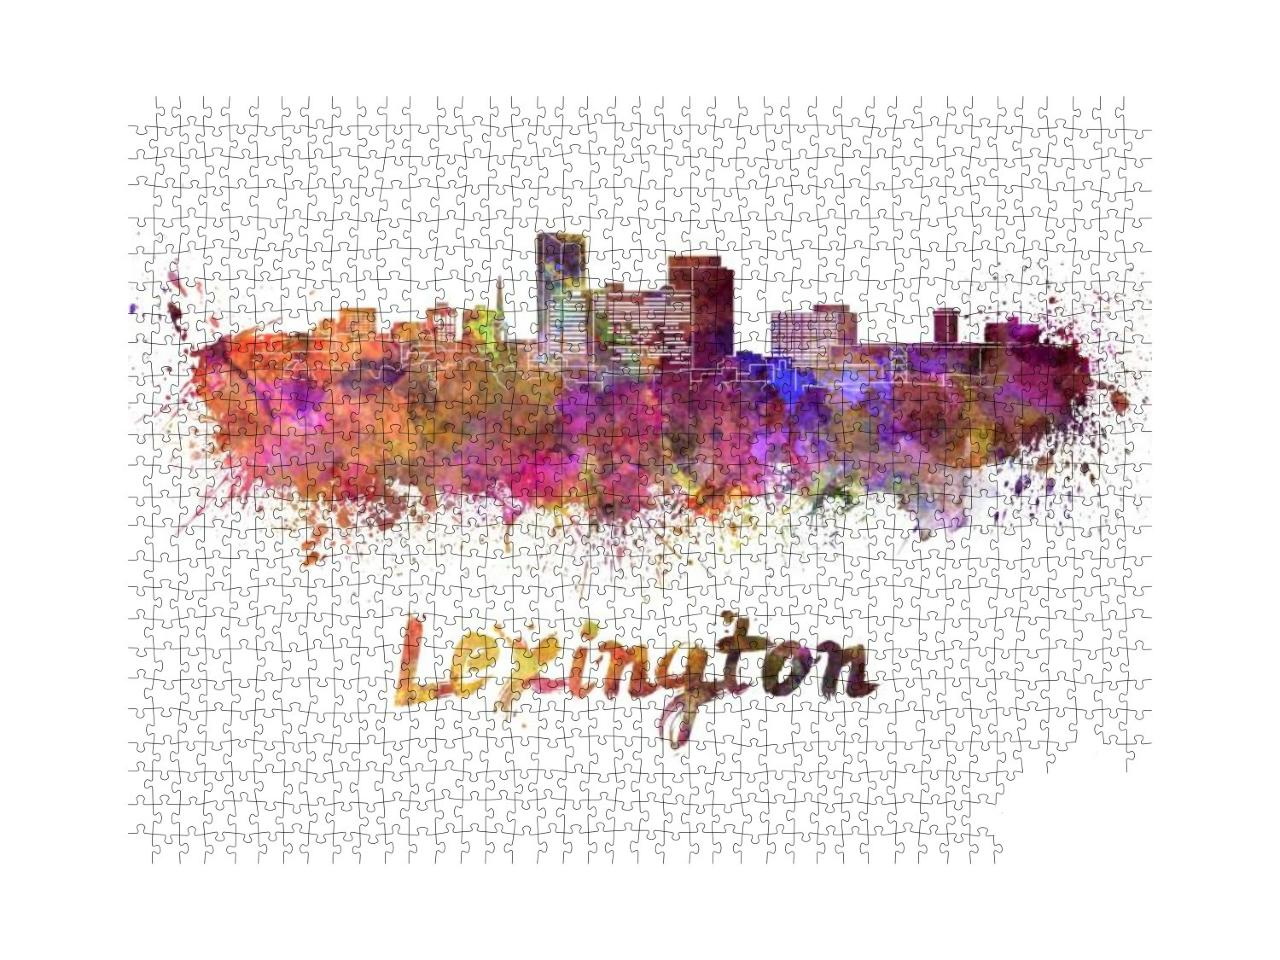 Lexington Skyline in Watercolor Splatters with Clipping P... Jigsaw Puzzle with 1000 pieces